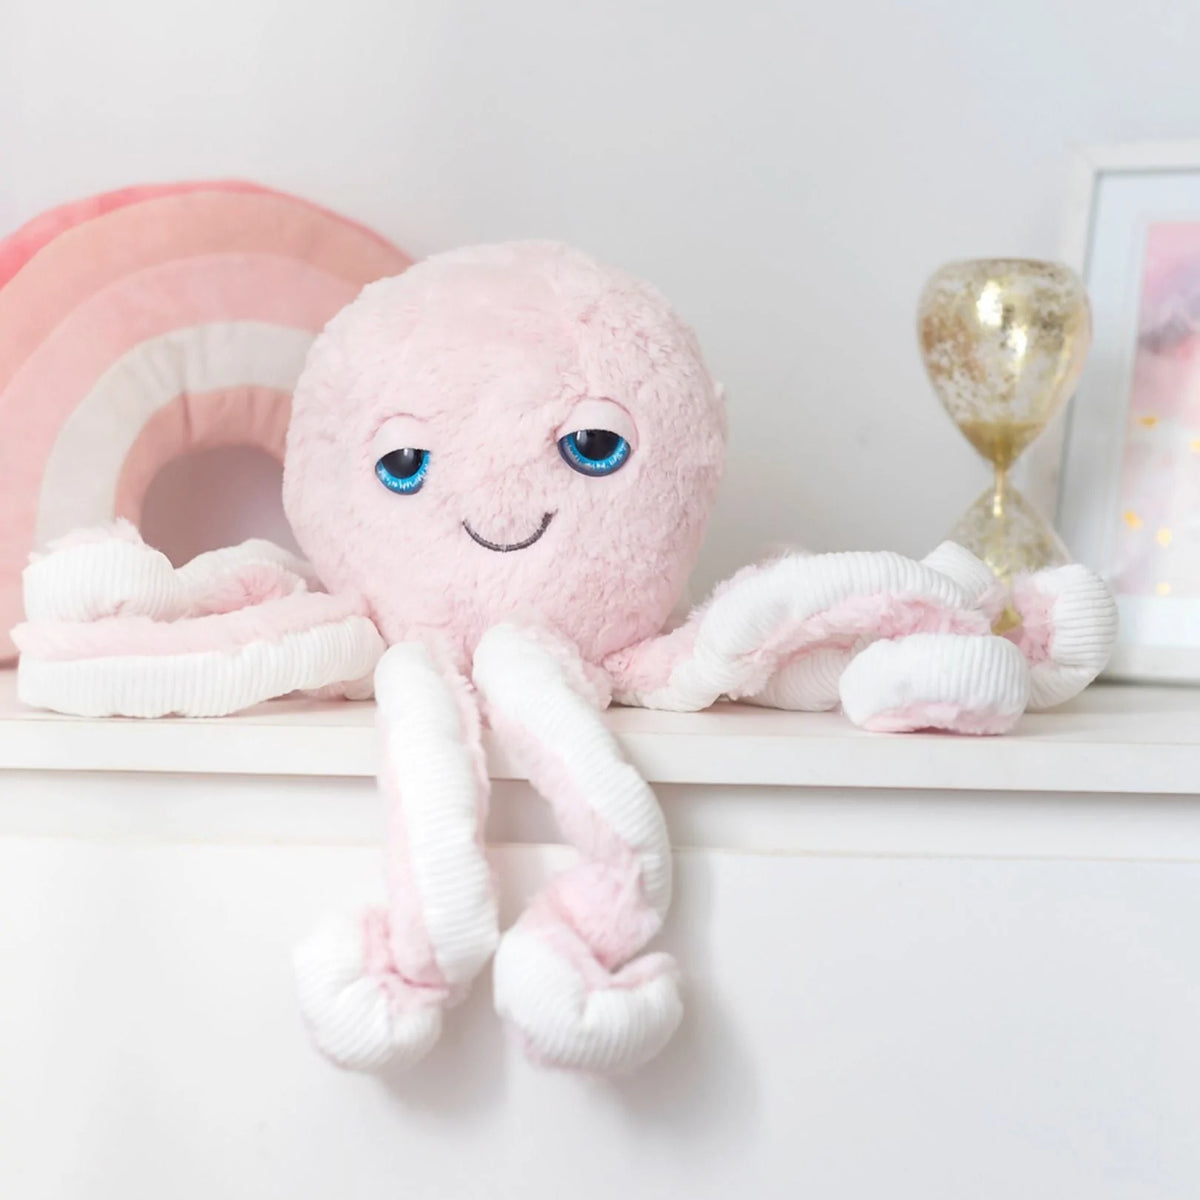 Octopus | Cove Octopus | Soft Pink